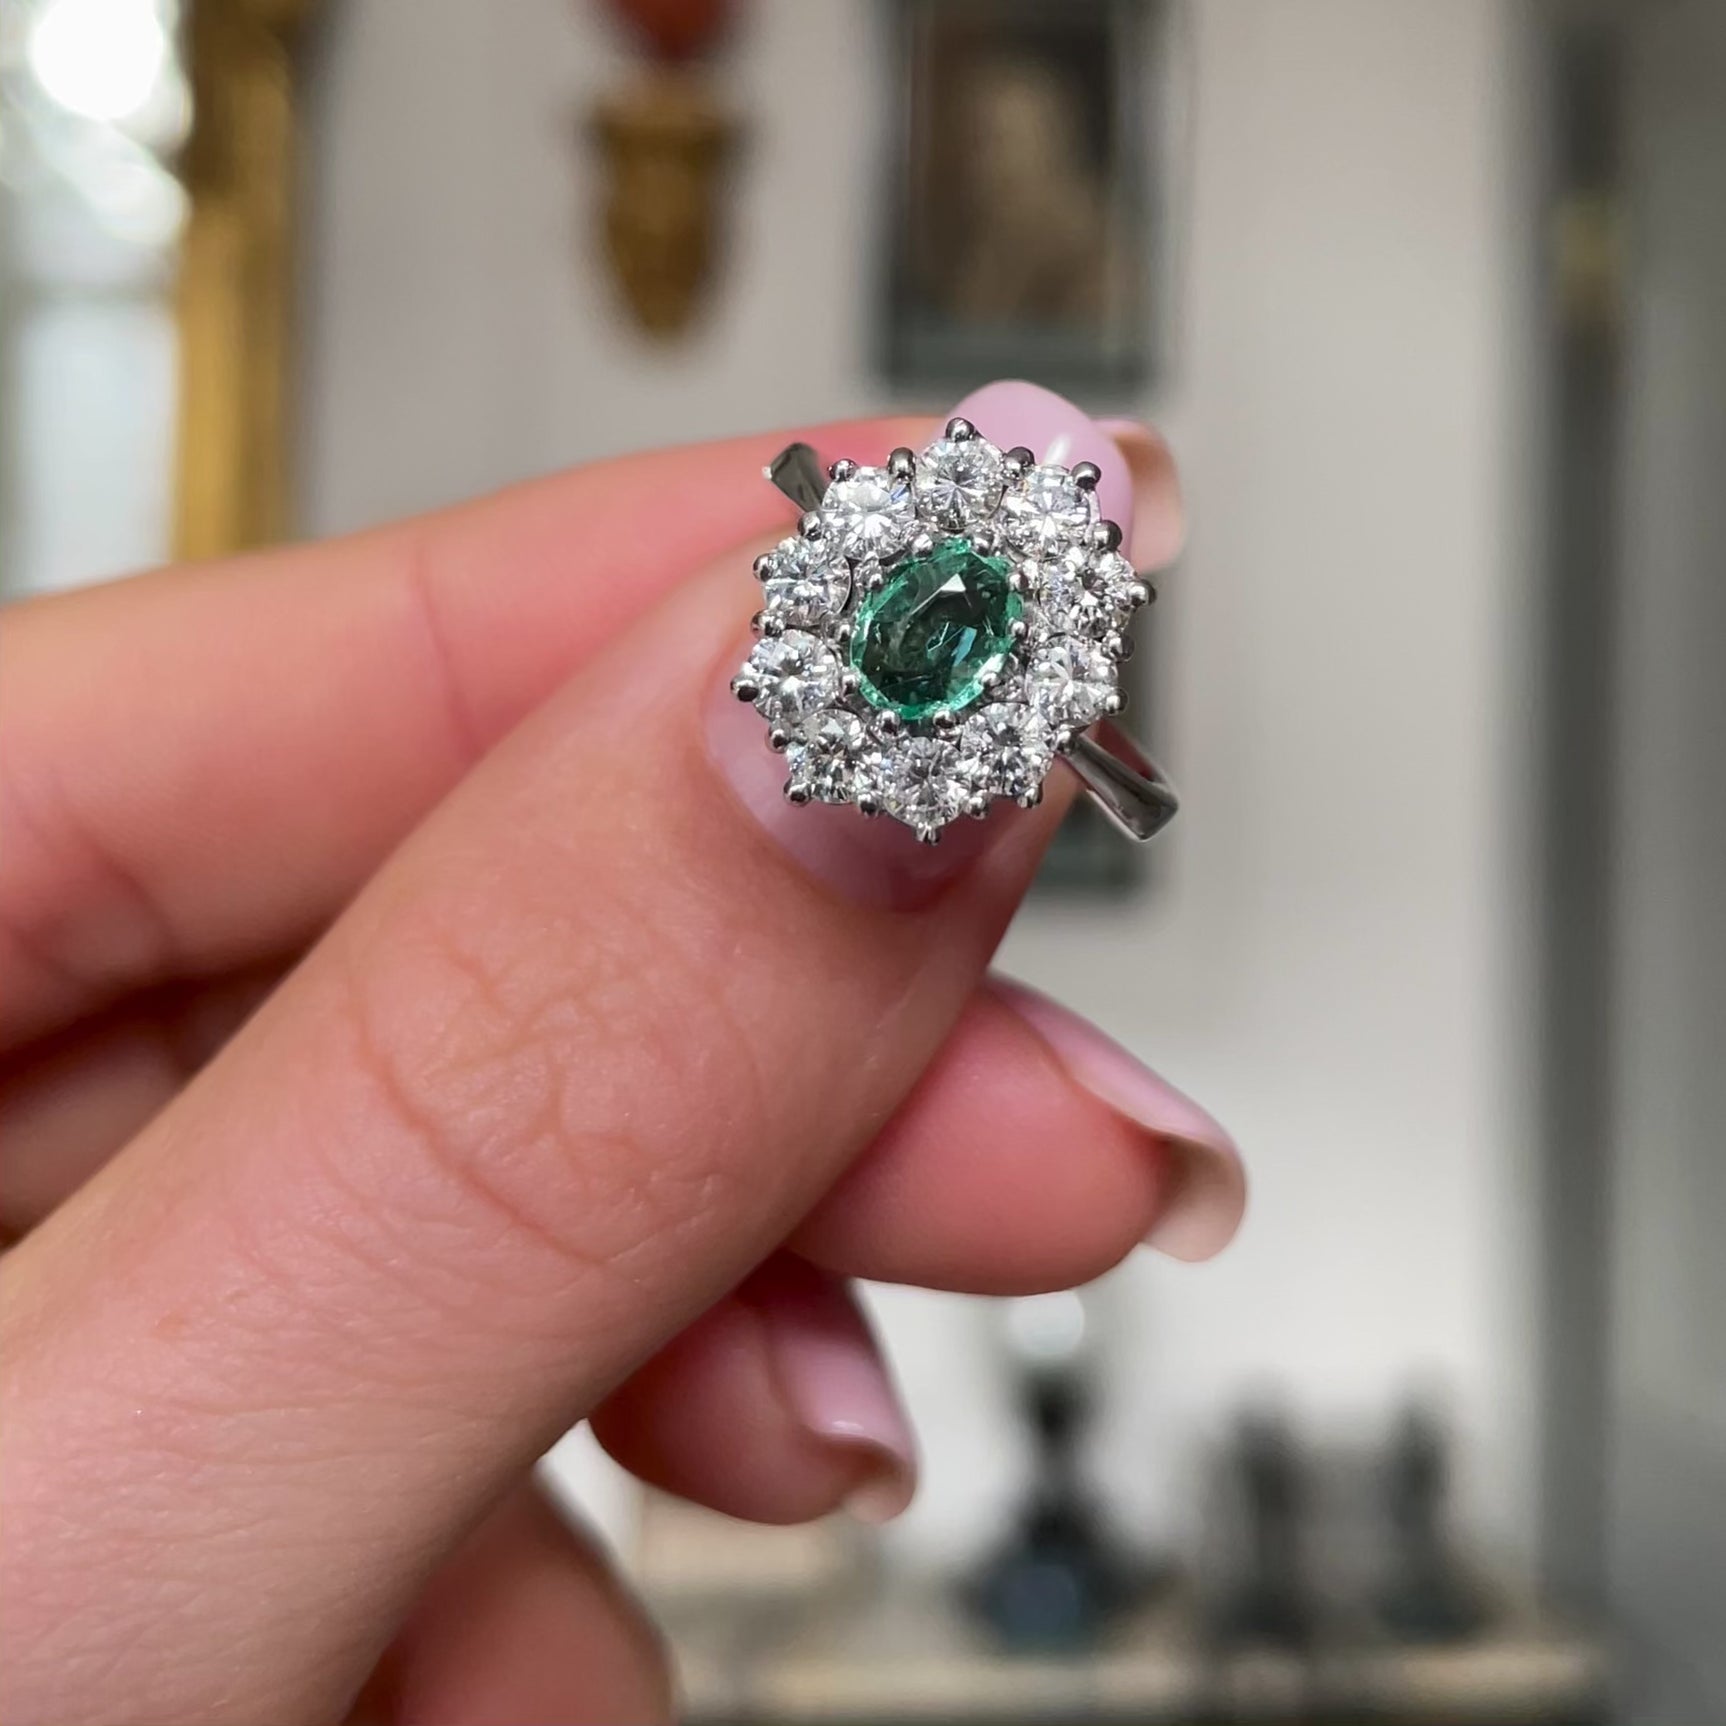 Austrian emerald and diamond cluster engagement ring, held in fingers and moved around to give perspective.